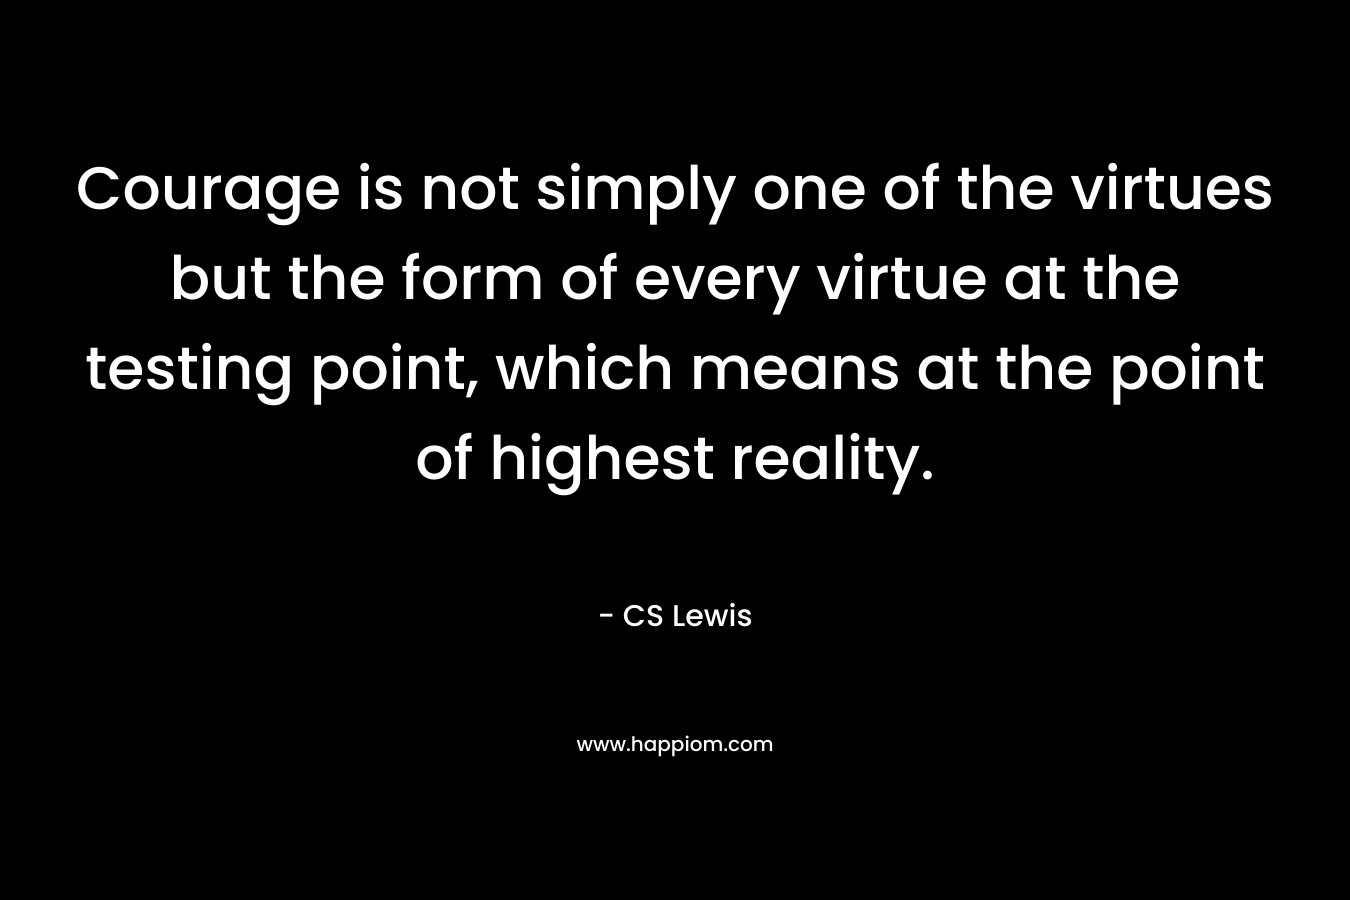 Courage is not simply one of the virtues but the form of every virtue at the testing point, which means at the point of highest reality. 